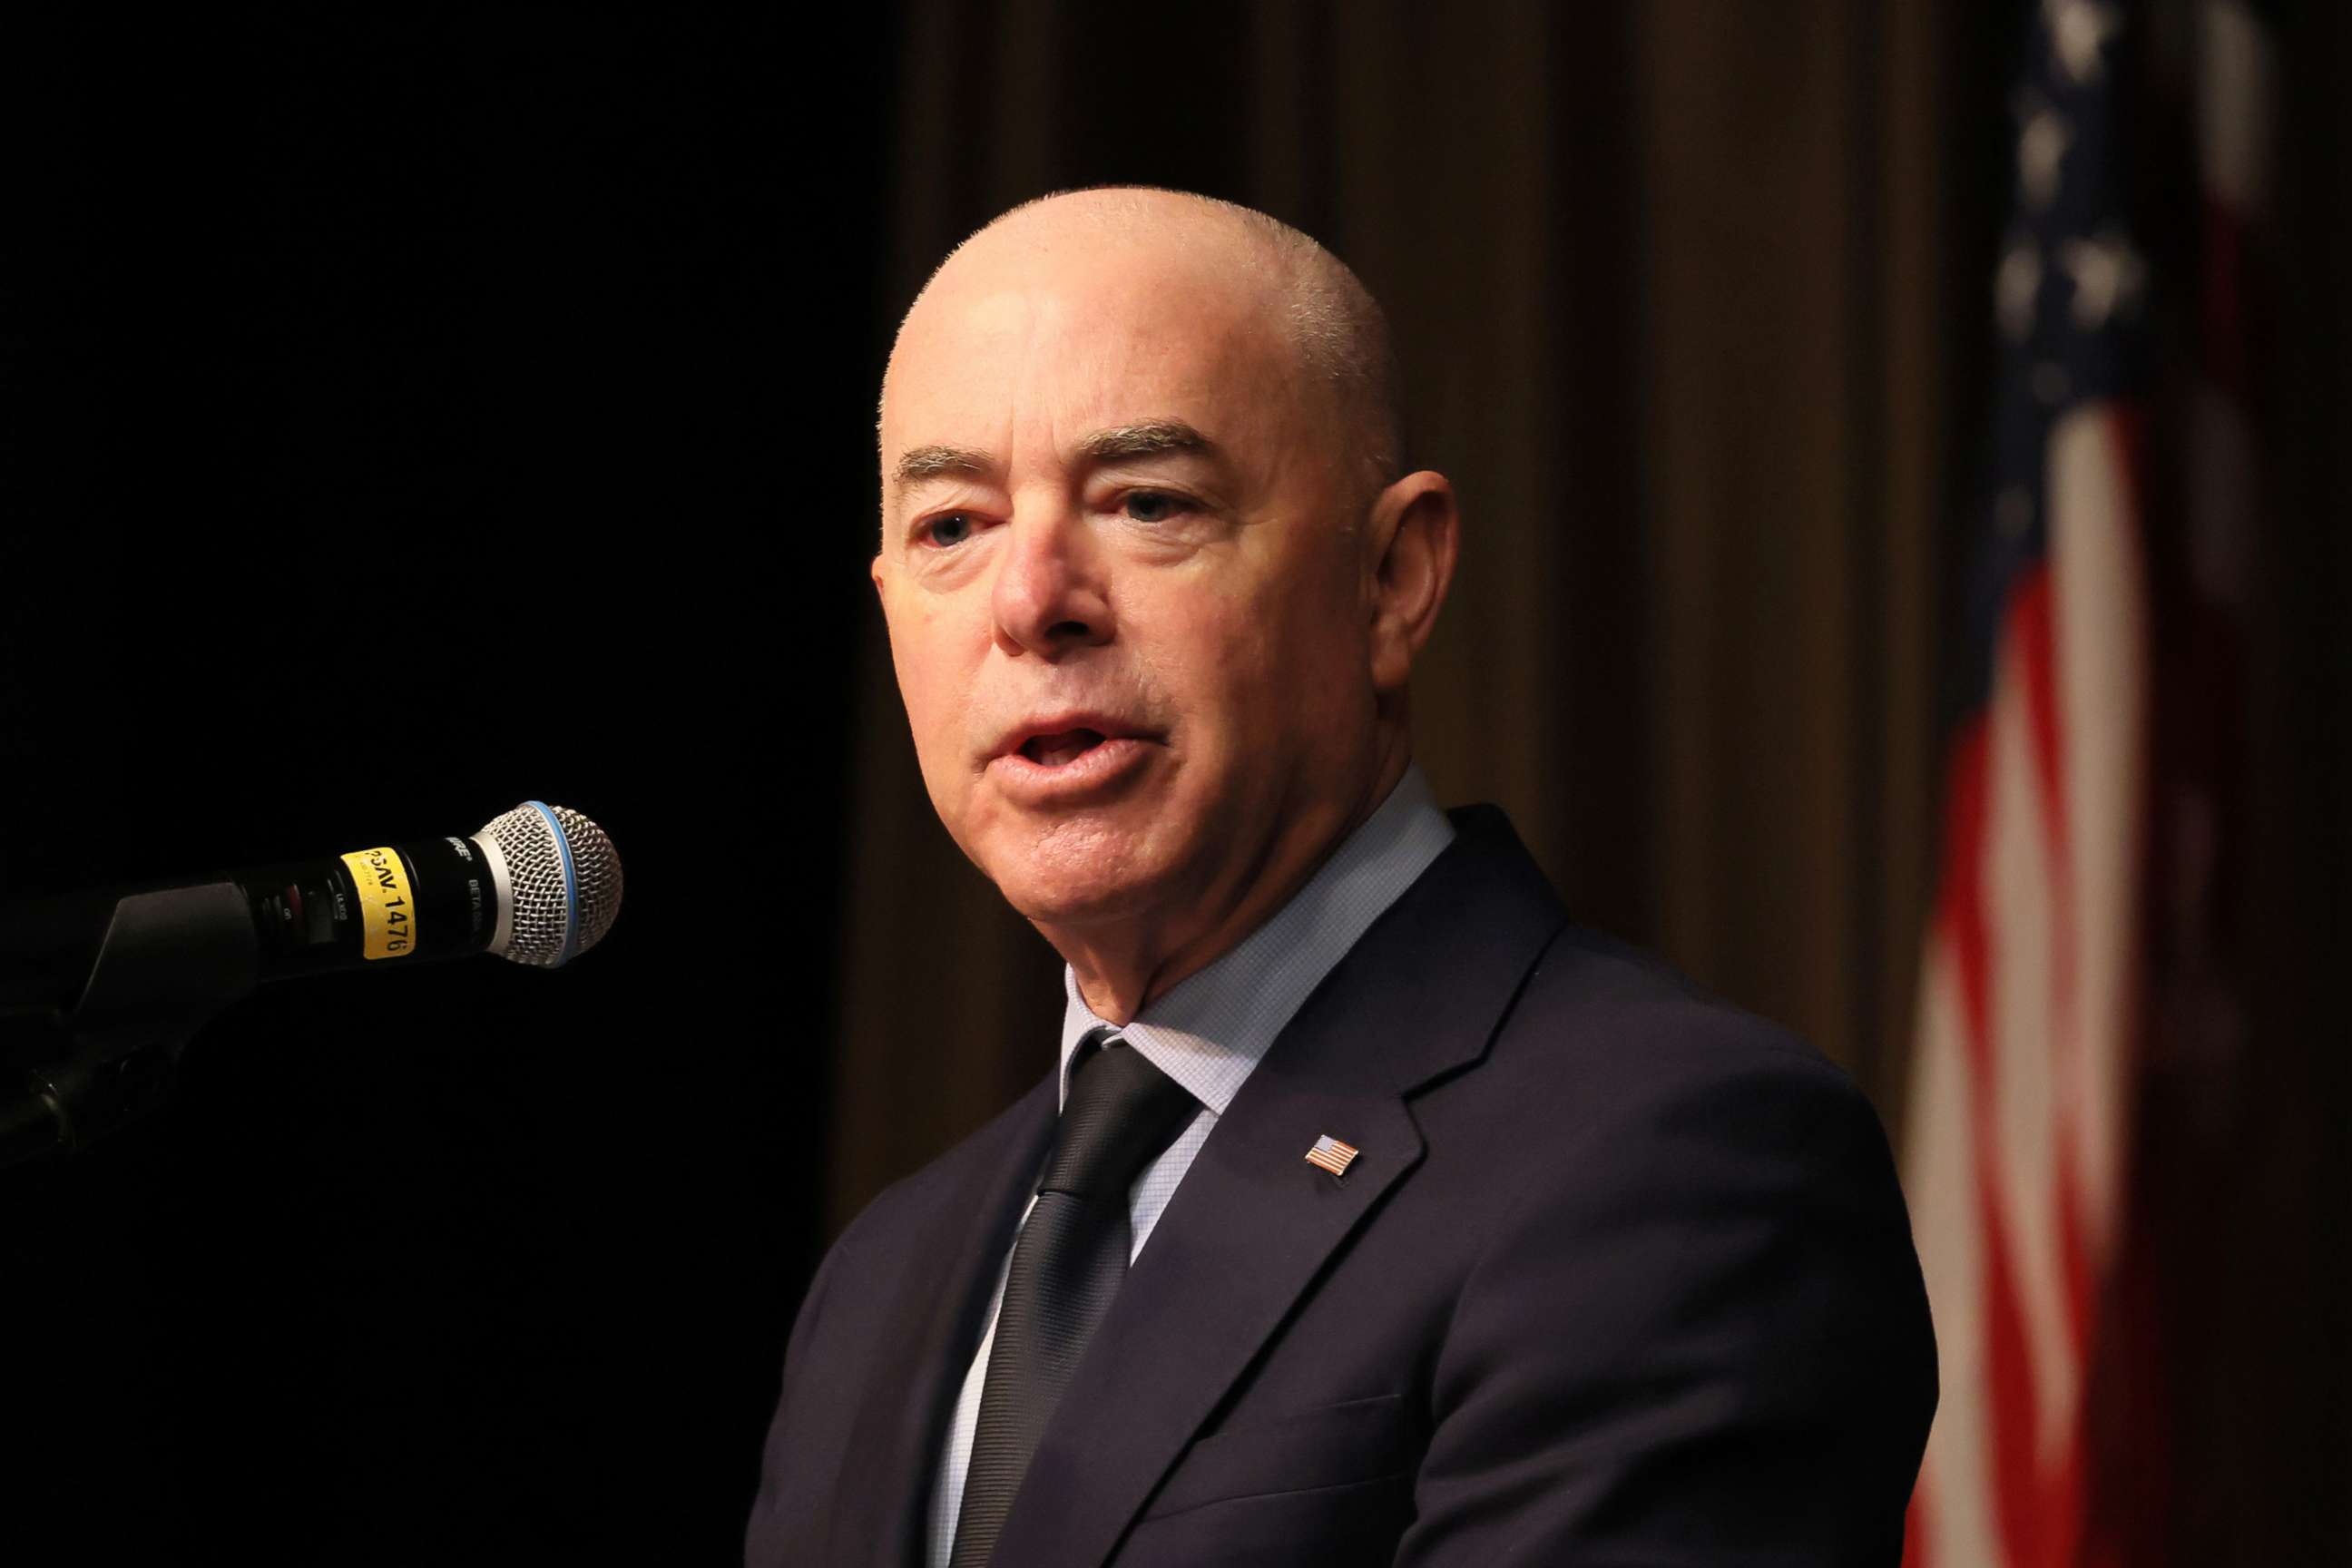 PHOTO: Secretary of Homeland Security Alejandro Mayorkas speaks during the third day of the 2022 National Action Network's Annual Convention on April 08, 2022 in New York City.